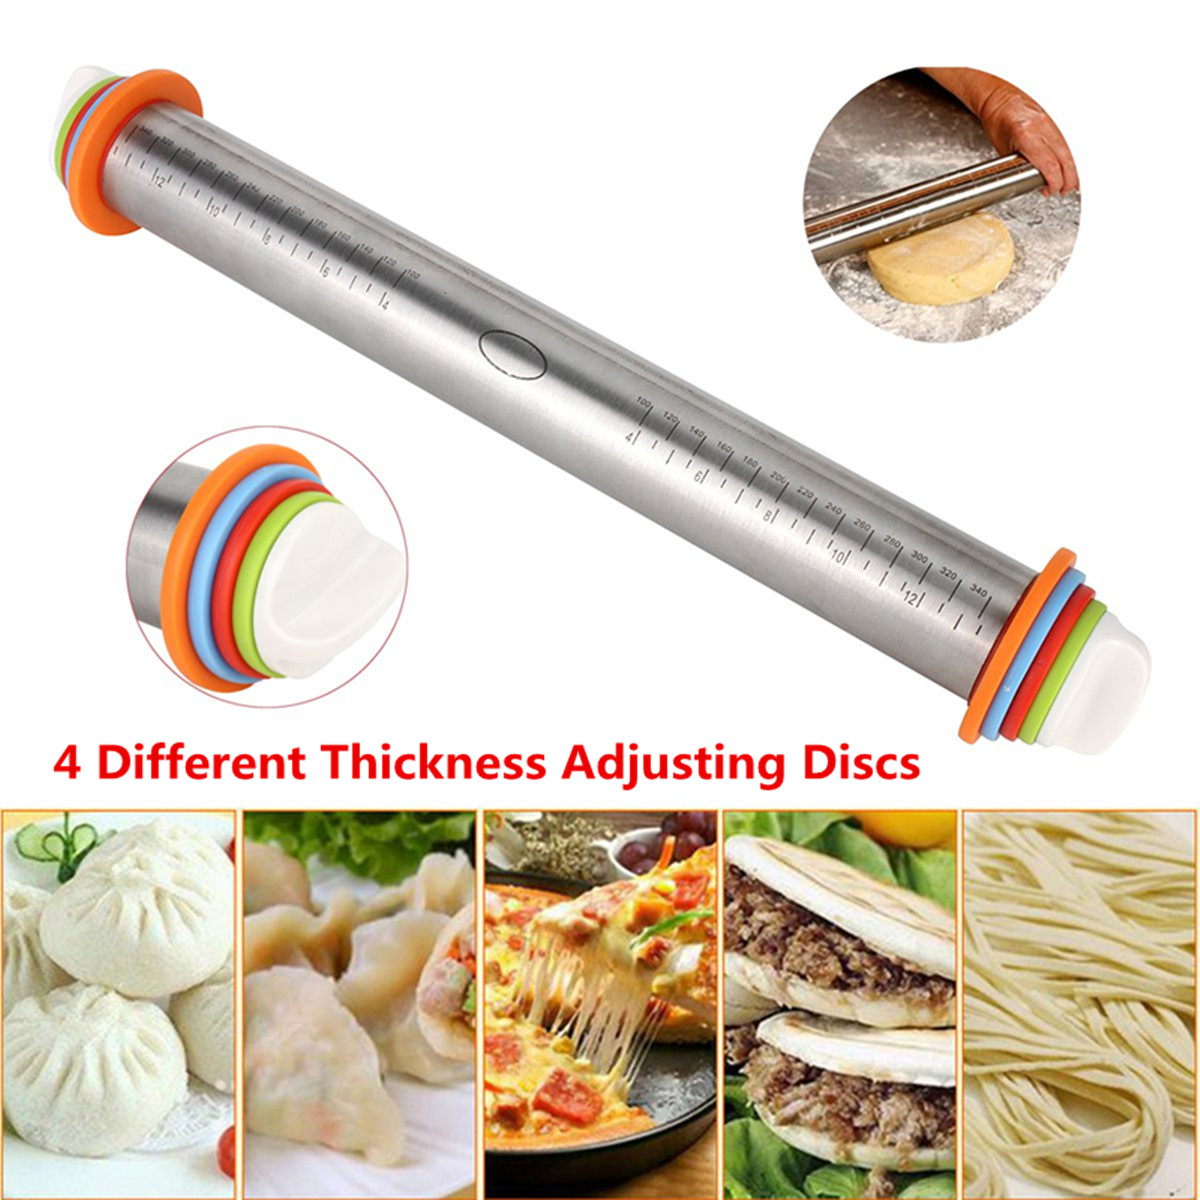 Stainless-Steel-Removable-Rolling-Pin-Tools-For-Baking-Dough-Pizza-Cookies-4-Sizes-Adjusting-Discs-1141081